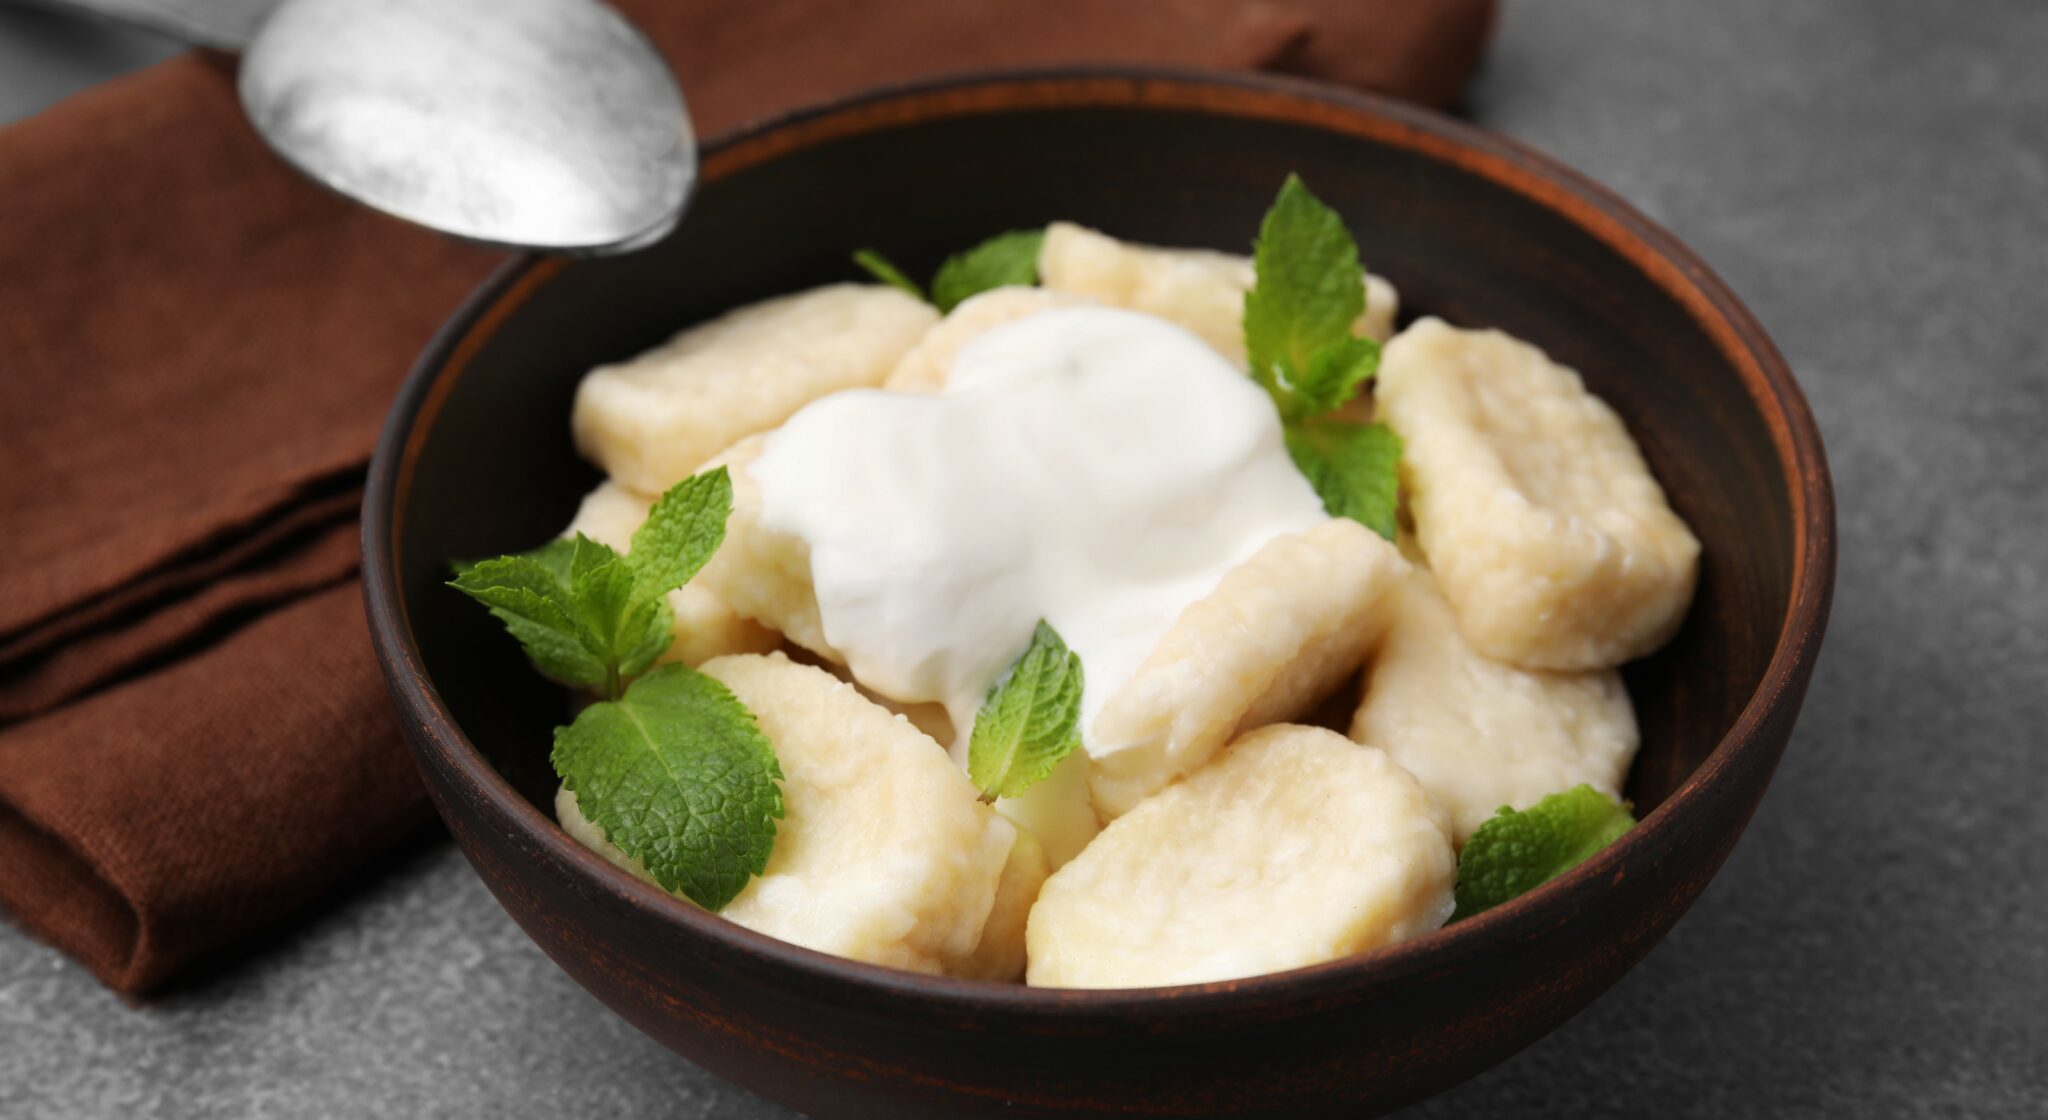 Bowl of tasty lazy dumplings with sour cream and mint leaves on brown table